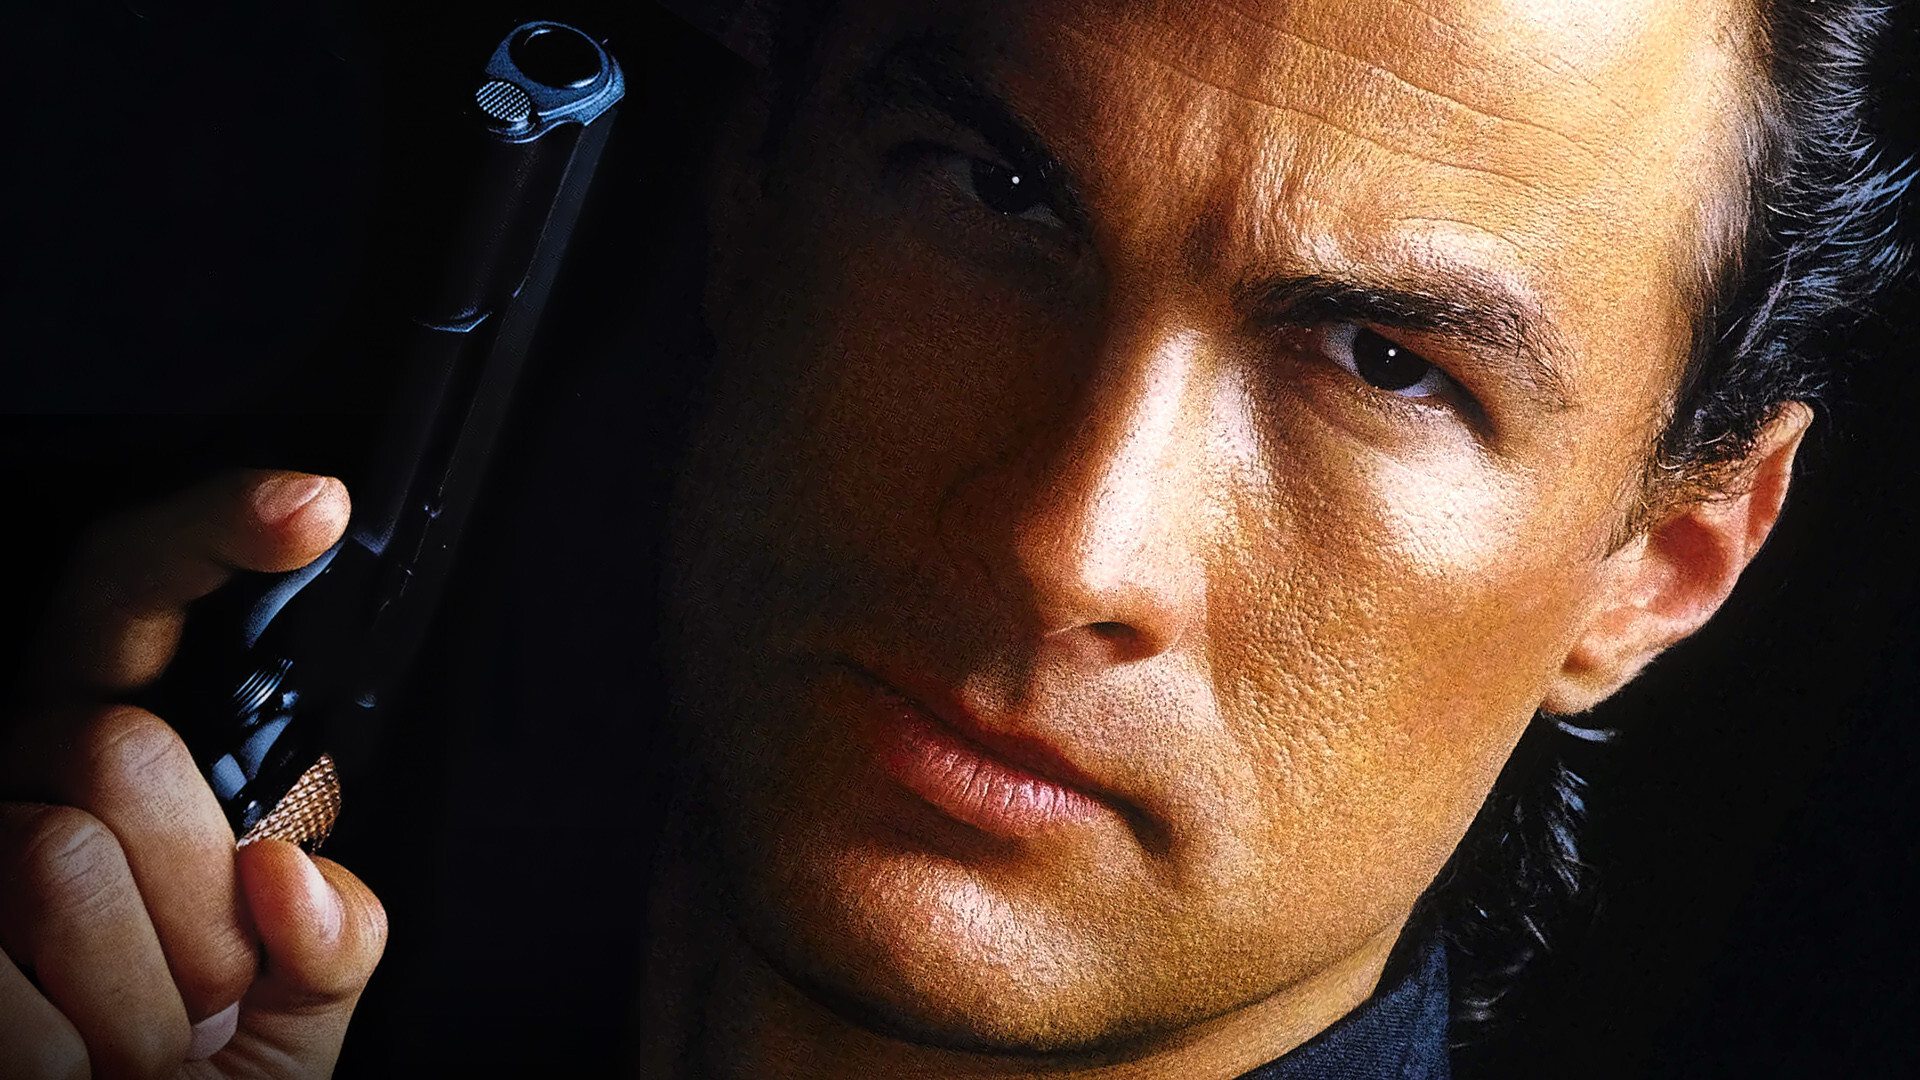 Steven Seagal: 1988, Acting debut in Above the Law, A box office hit making him an action hero, Nico. 1920x1080 Full HD Wallpaper.